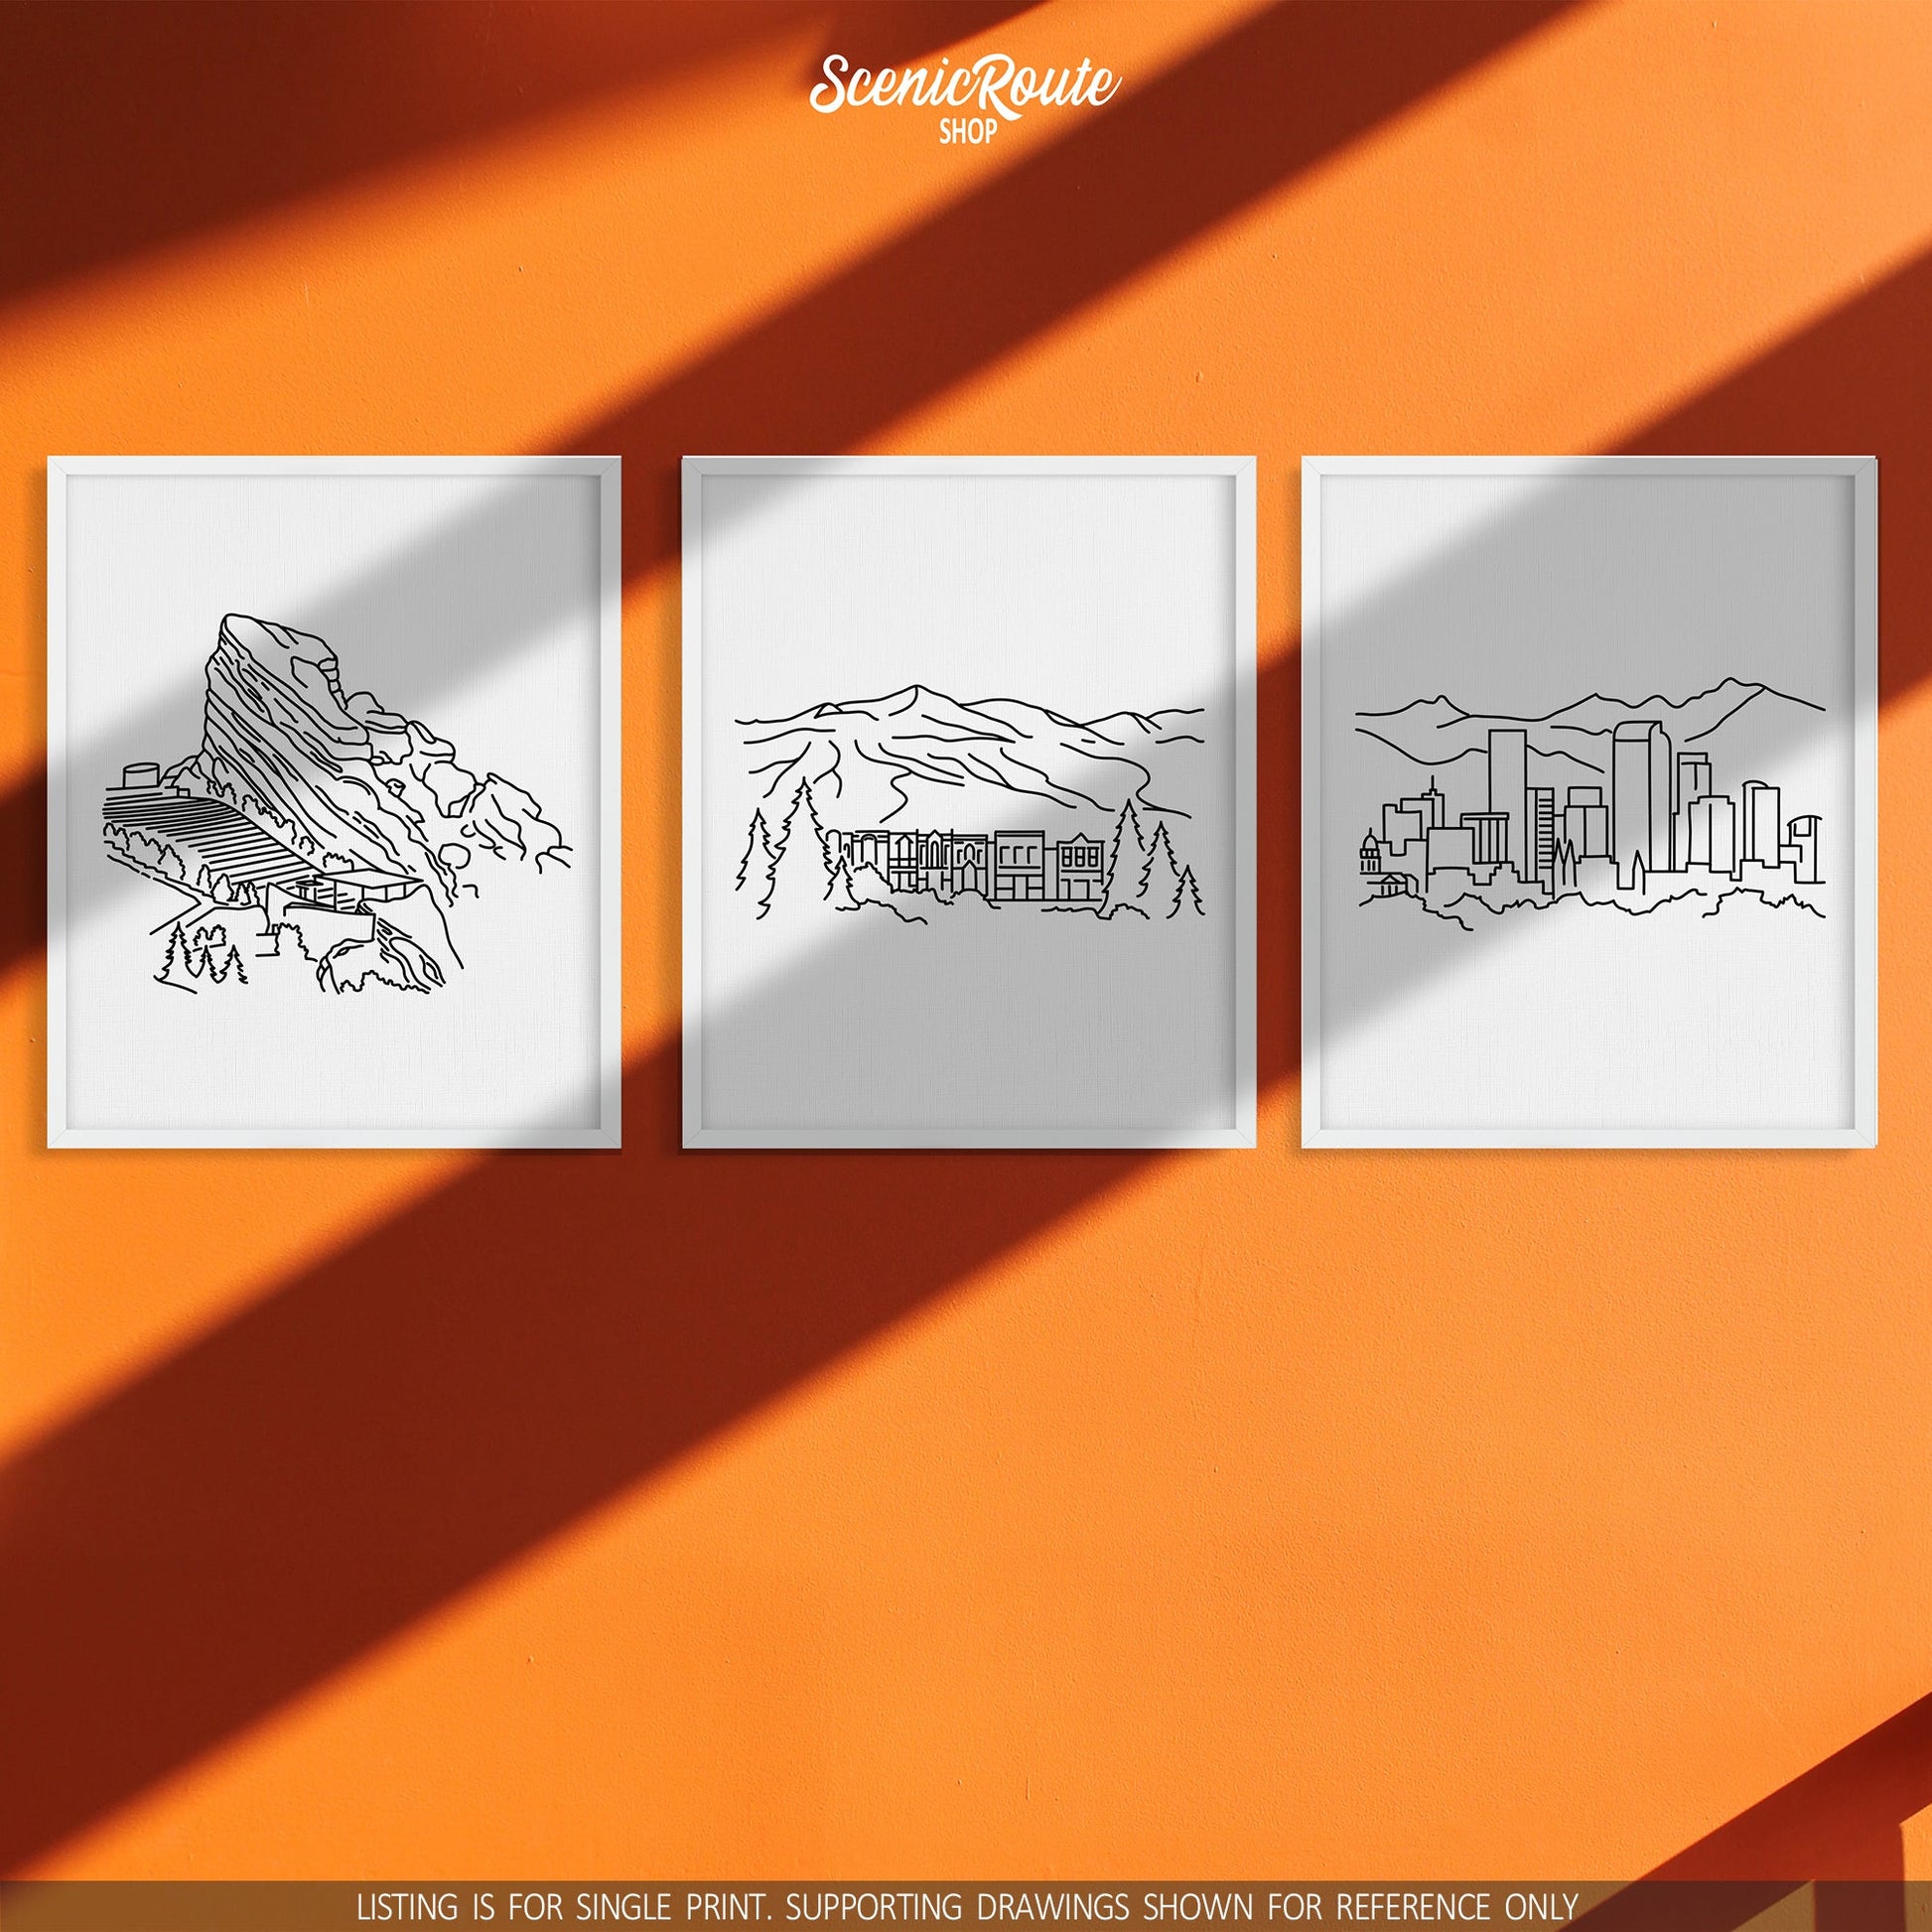 A group of three framed drawings on an orange wall. The line art drawings include Red Rocks Amphitheatre, Breckenridge, and the Denver Skyline